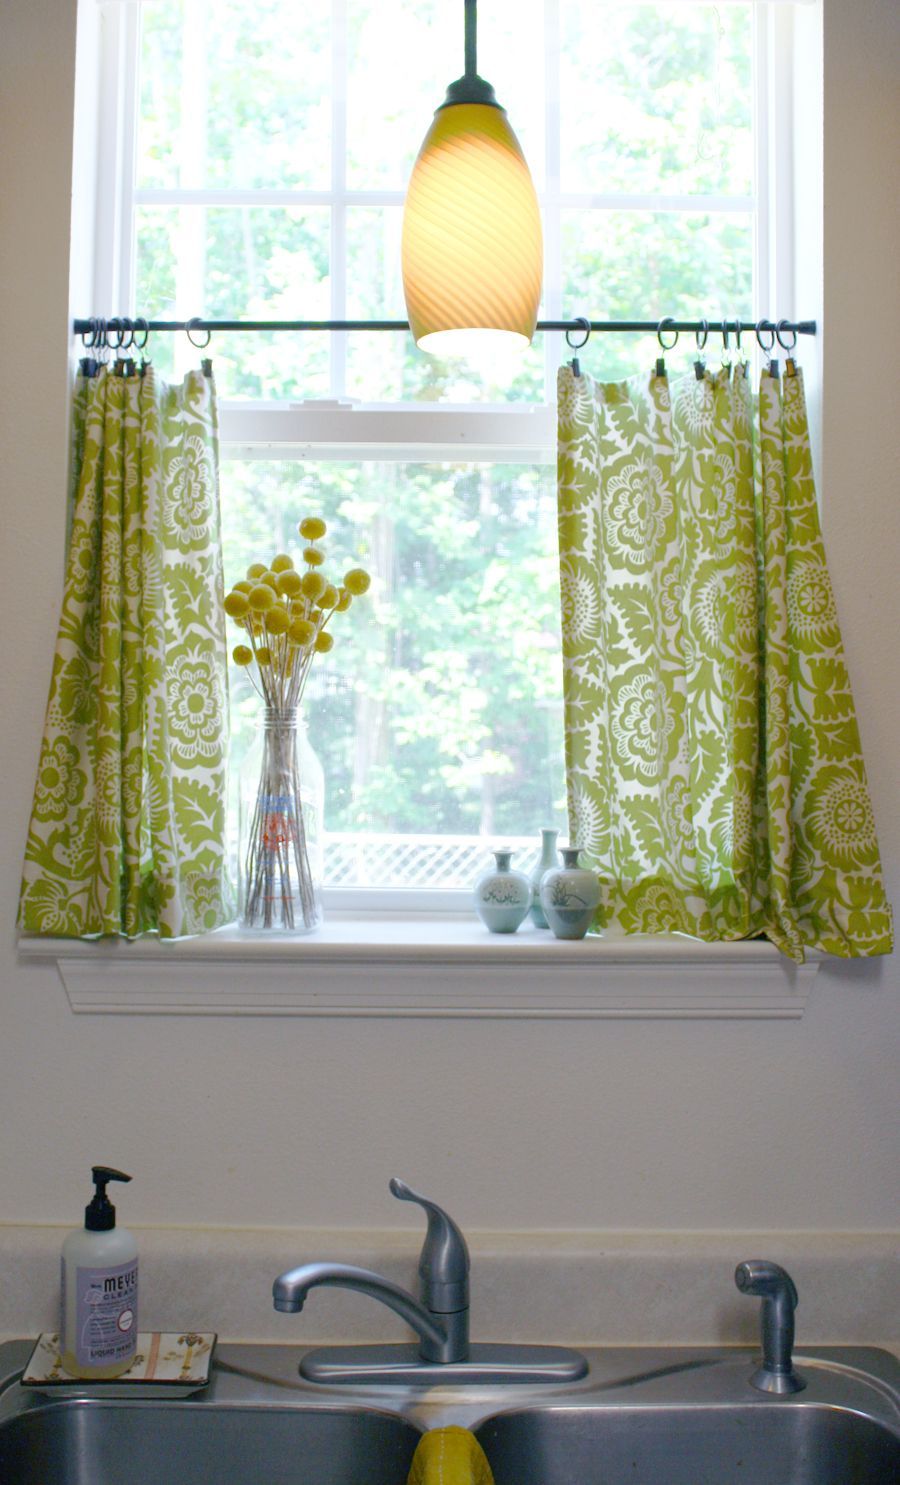 Kitchen cafe curtains with a tension rod and curtain clips. The blog also has a link to an amazing idea for window treatments for